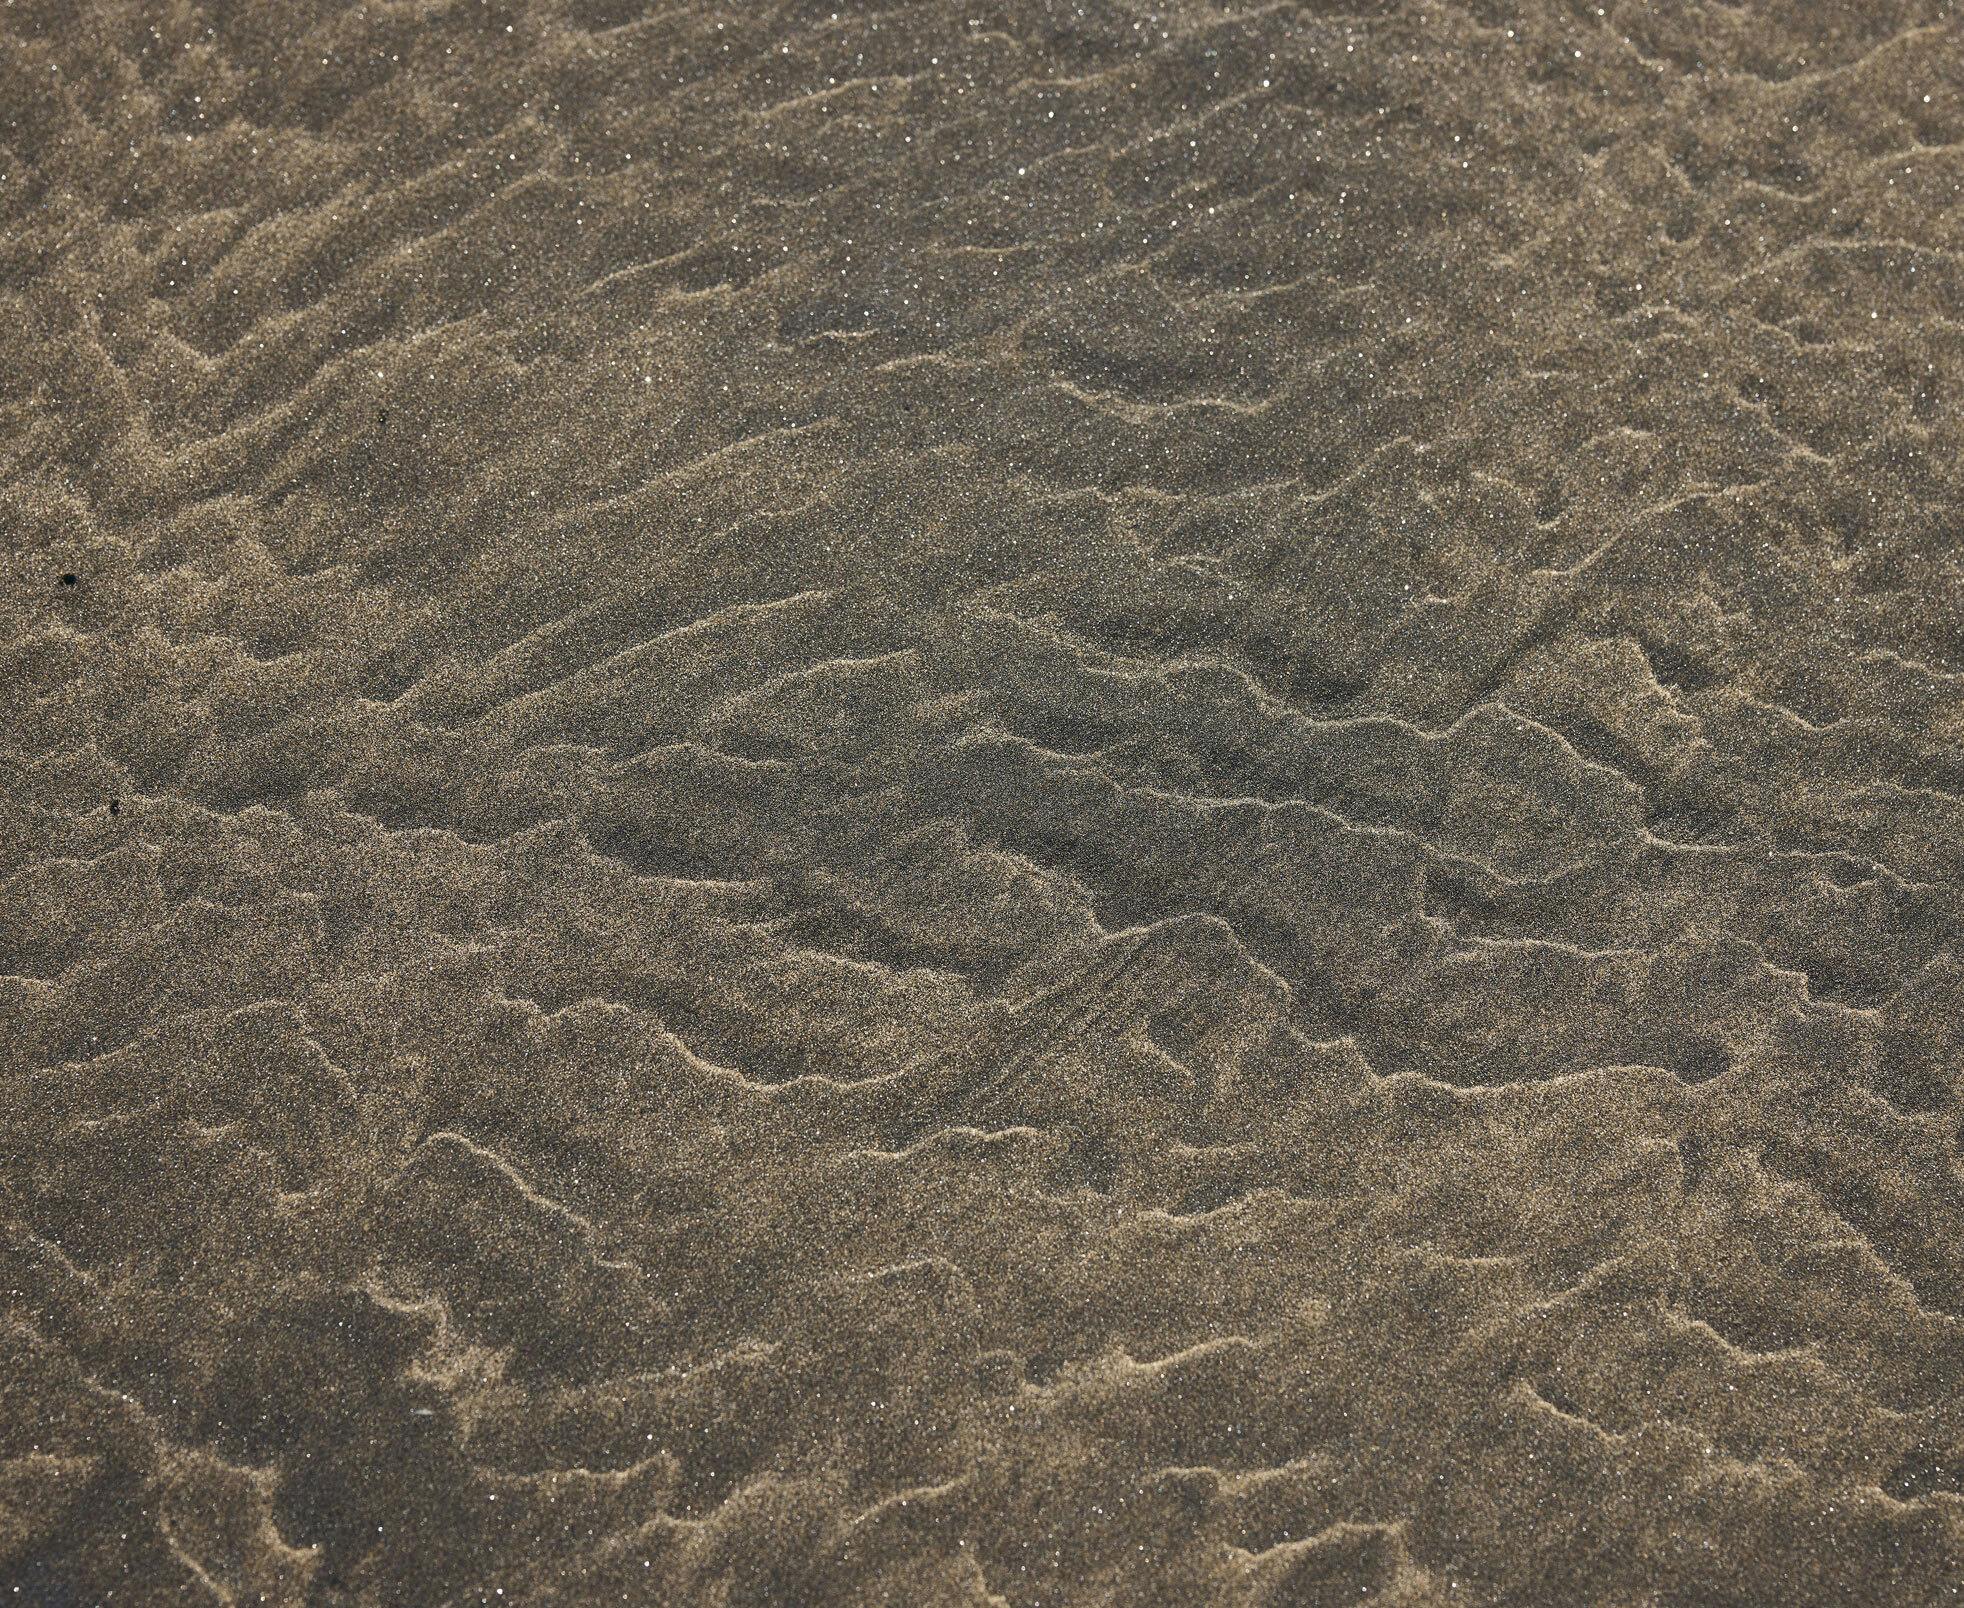 image of ripples in the sand under water